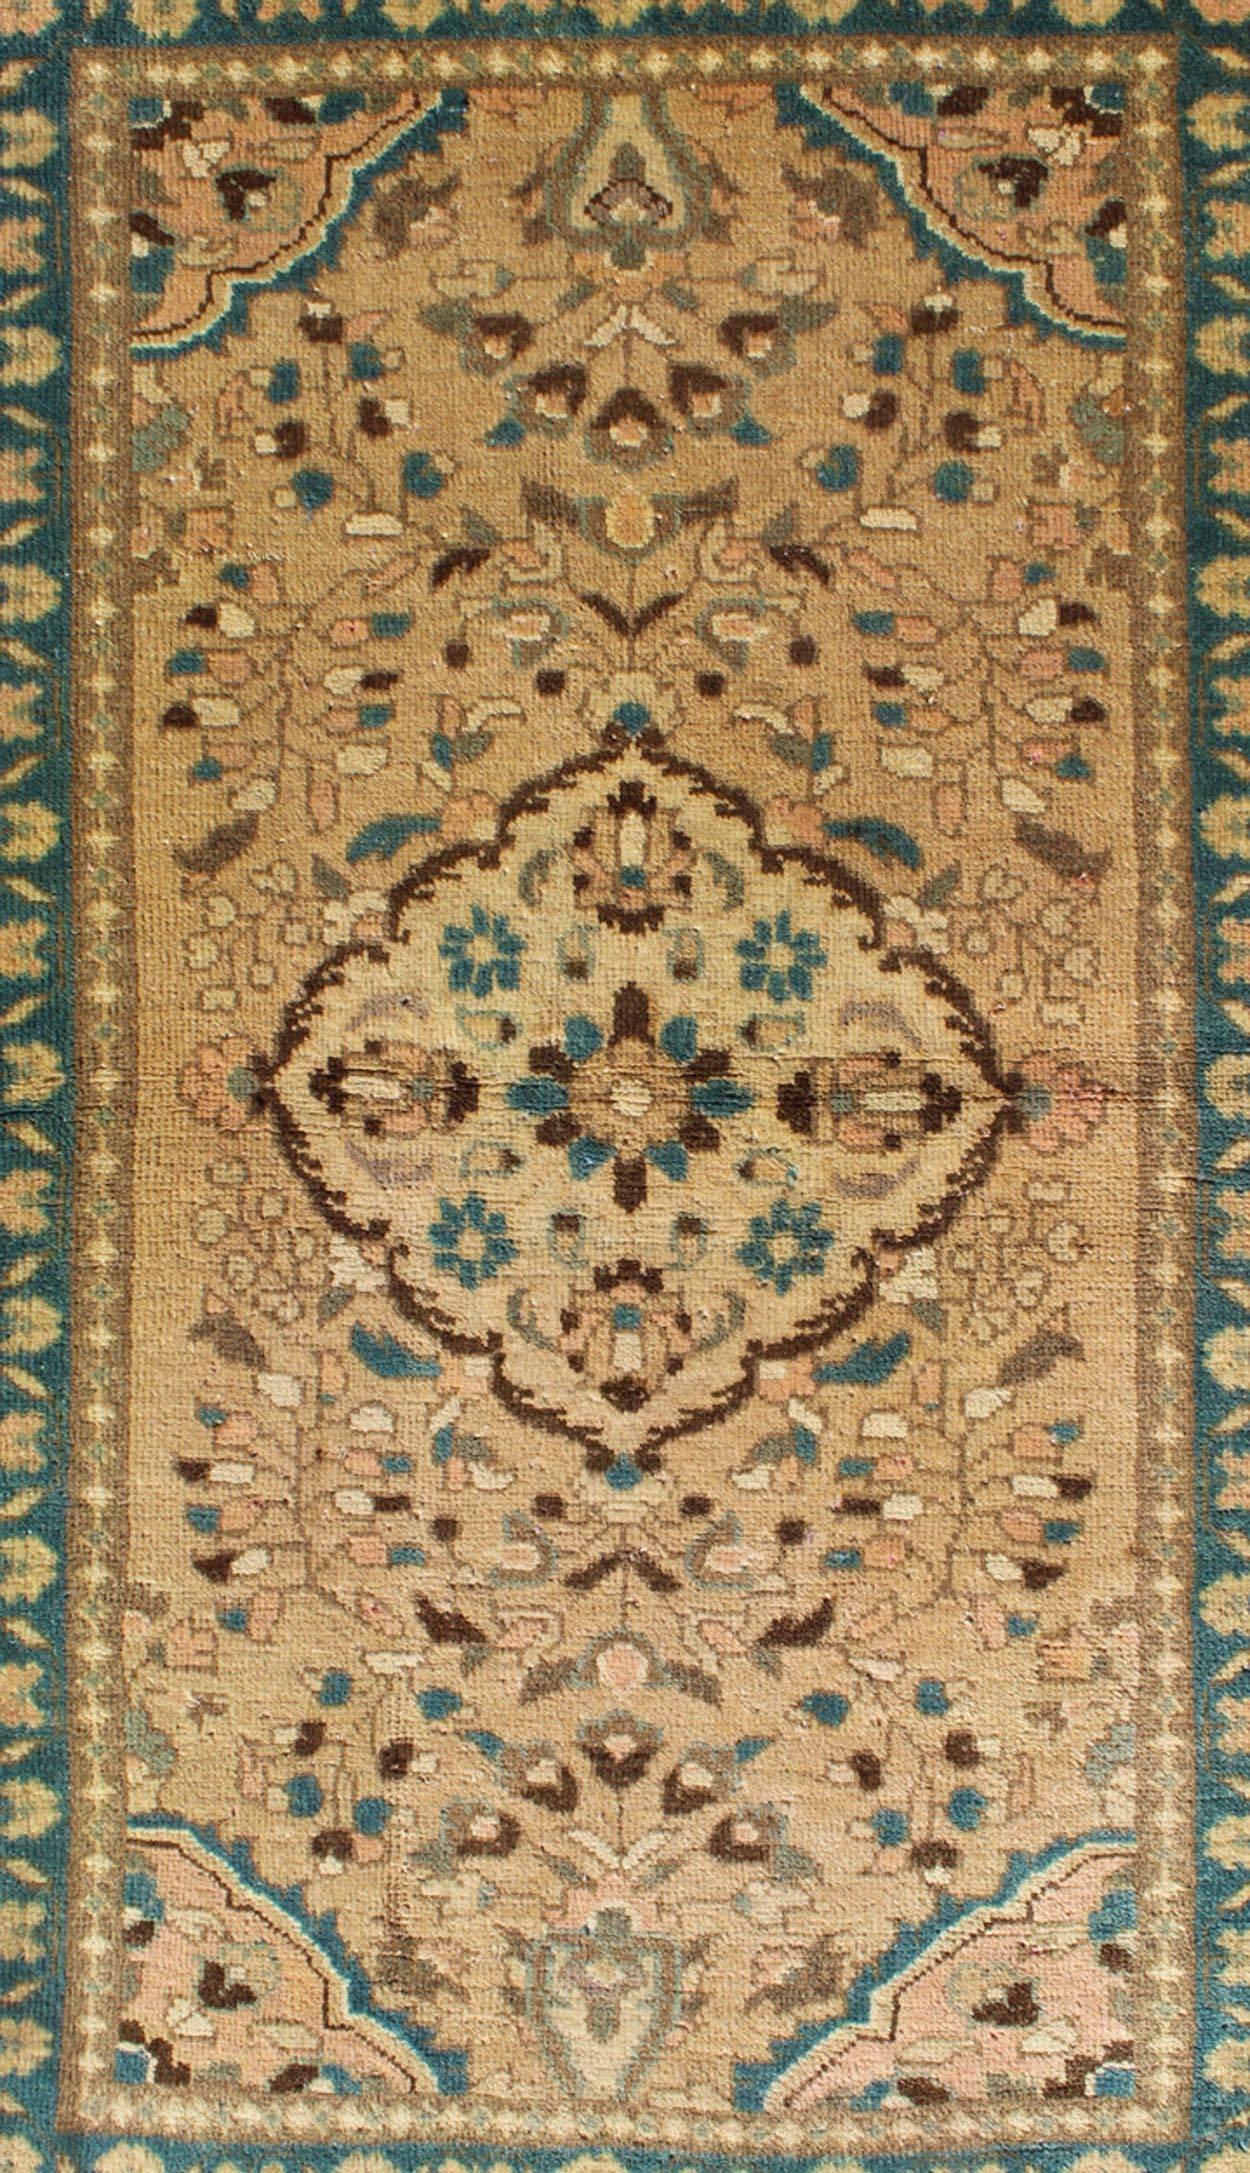 Malayer Floral Medallion Midcentury Persian Lilihan Rug in Tan, Taupe, and Turquoise